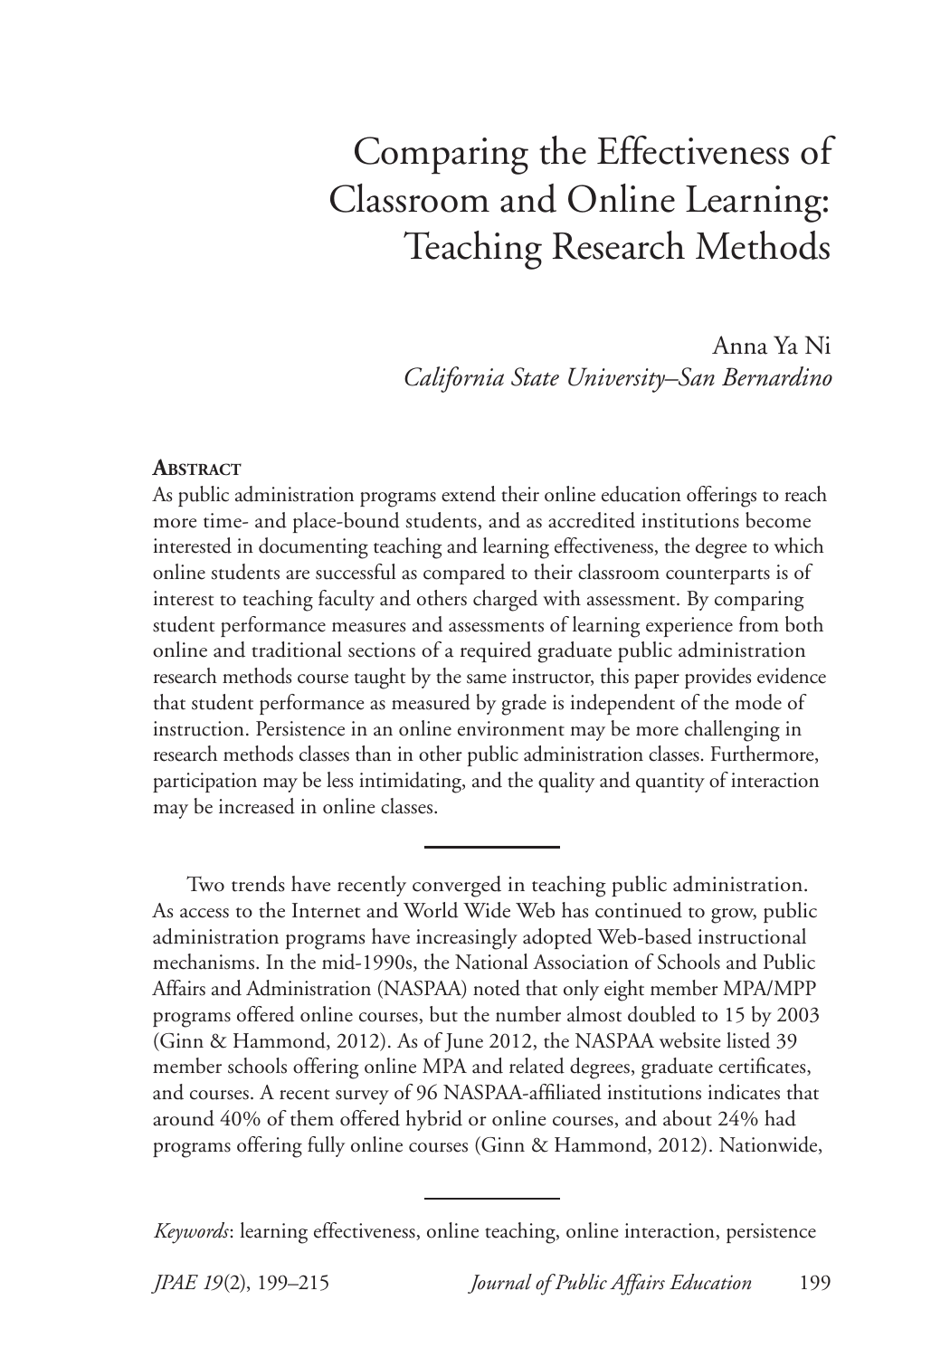 Comparing the Effectiveness of Classroom and Online Learning: Teaching Research Methods - Anna Ya Ni, Journal of Public Affairs Education, Page 1